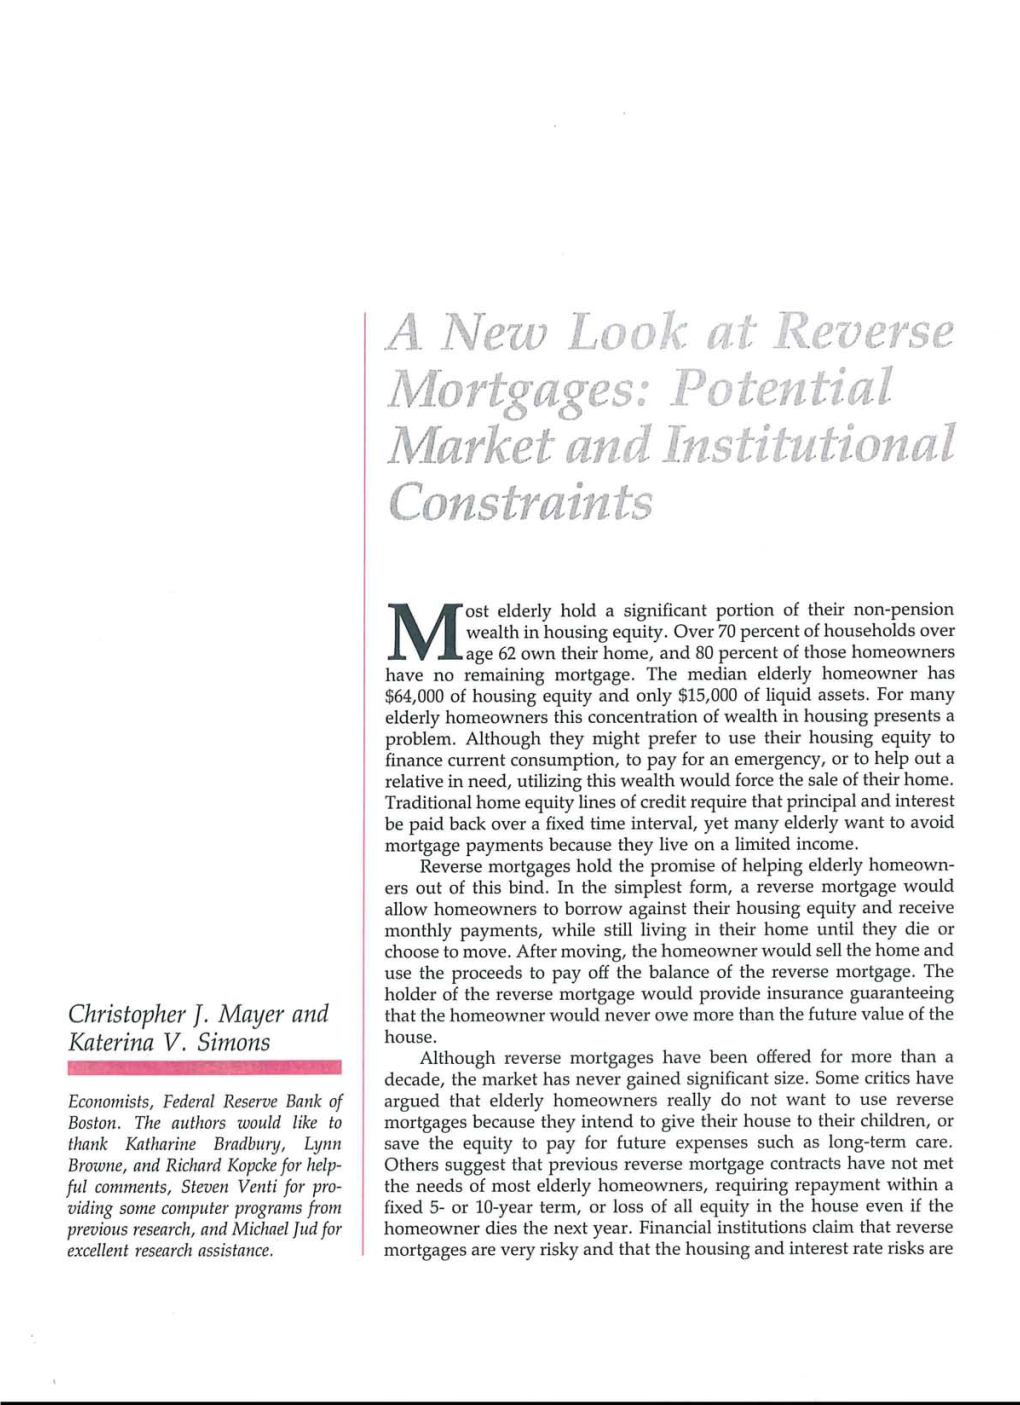 A New Look at Reverse Mortgages